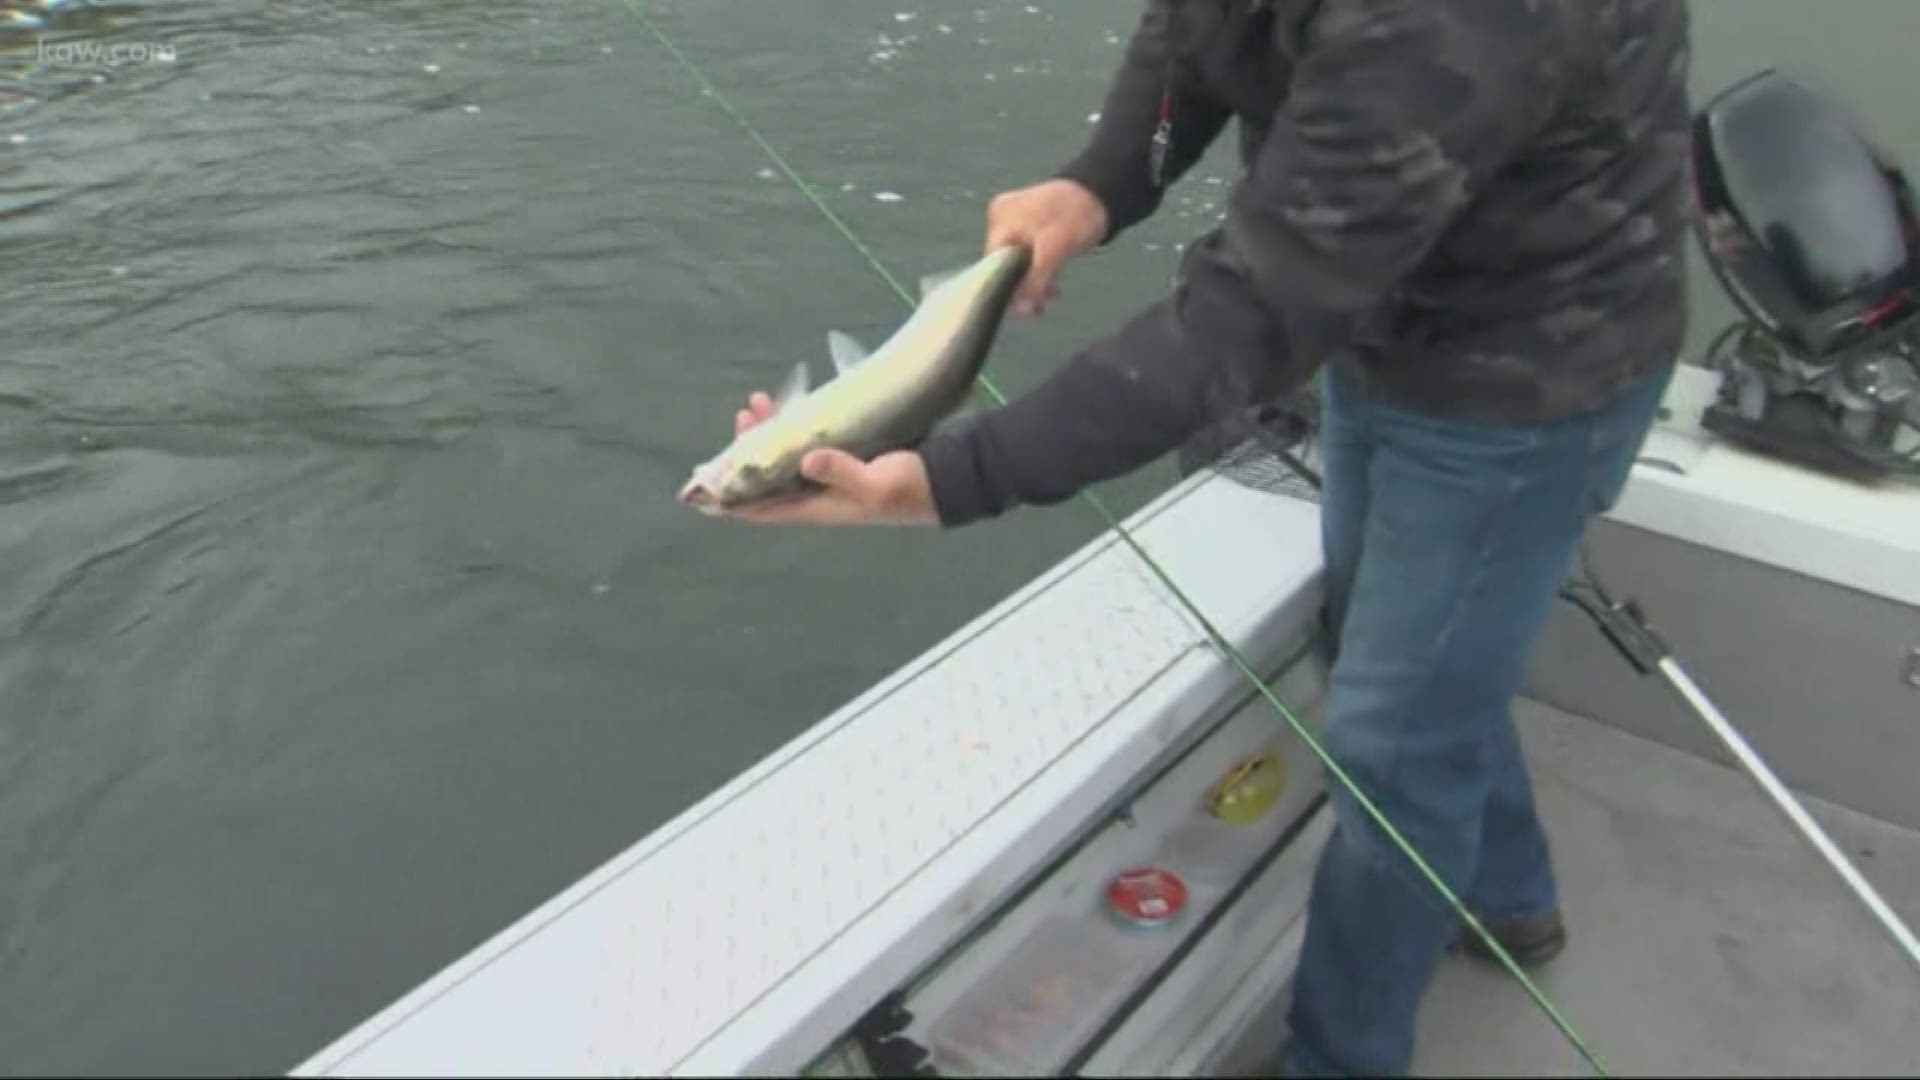 The largest run of American shad is up the Columbia River. KGW's Tim Gordon joined guide Rob Crandall, who reels in a fish during a live segment.